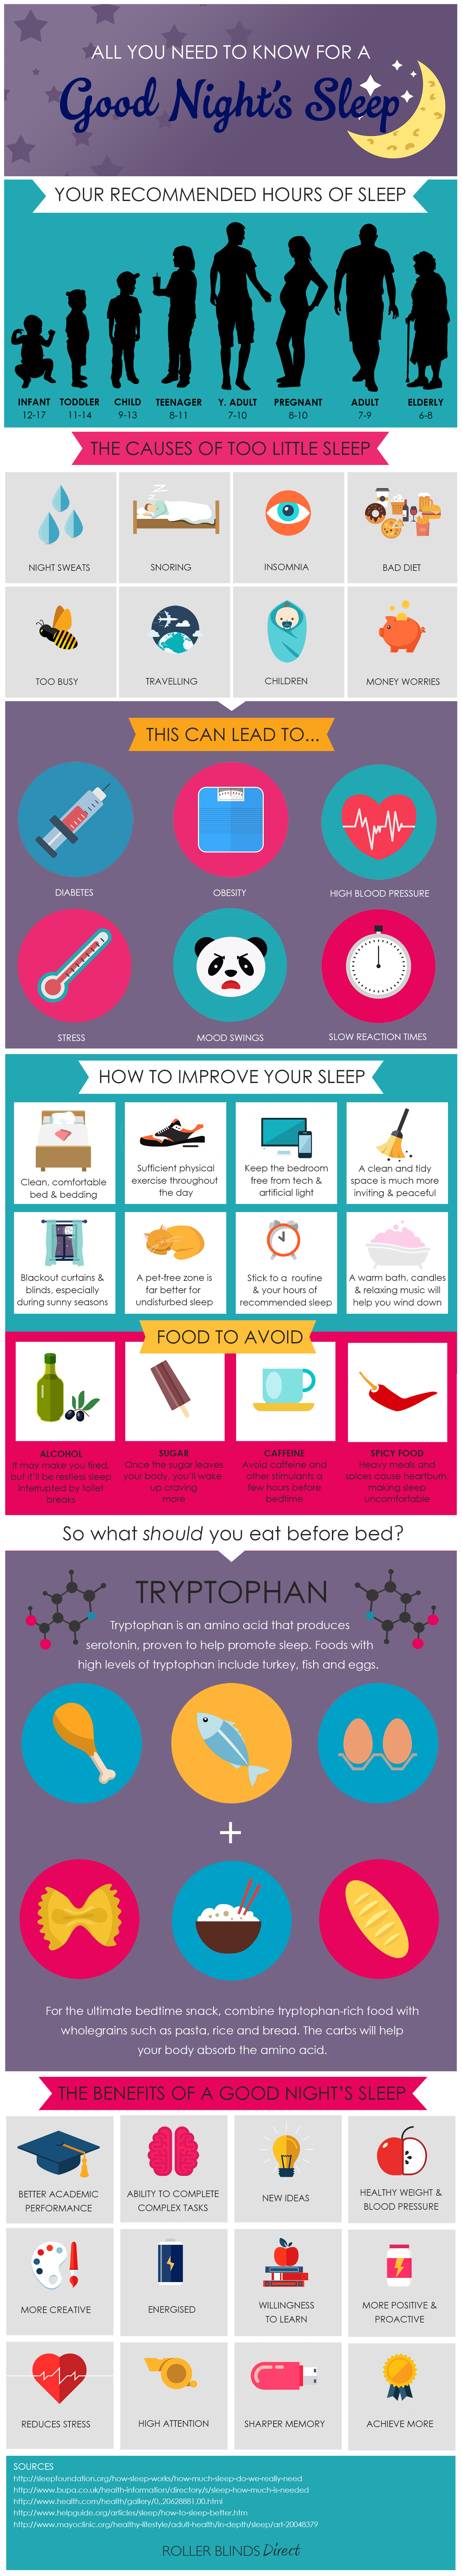 All You Need To Know For A Good Night's Sleep